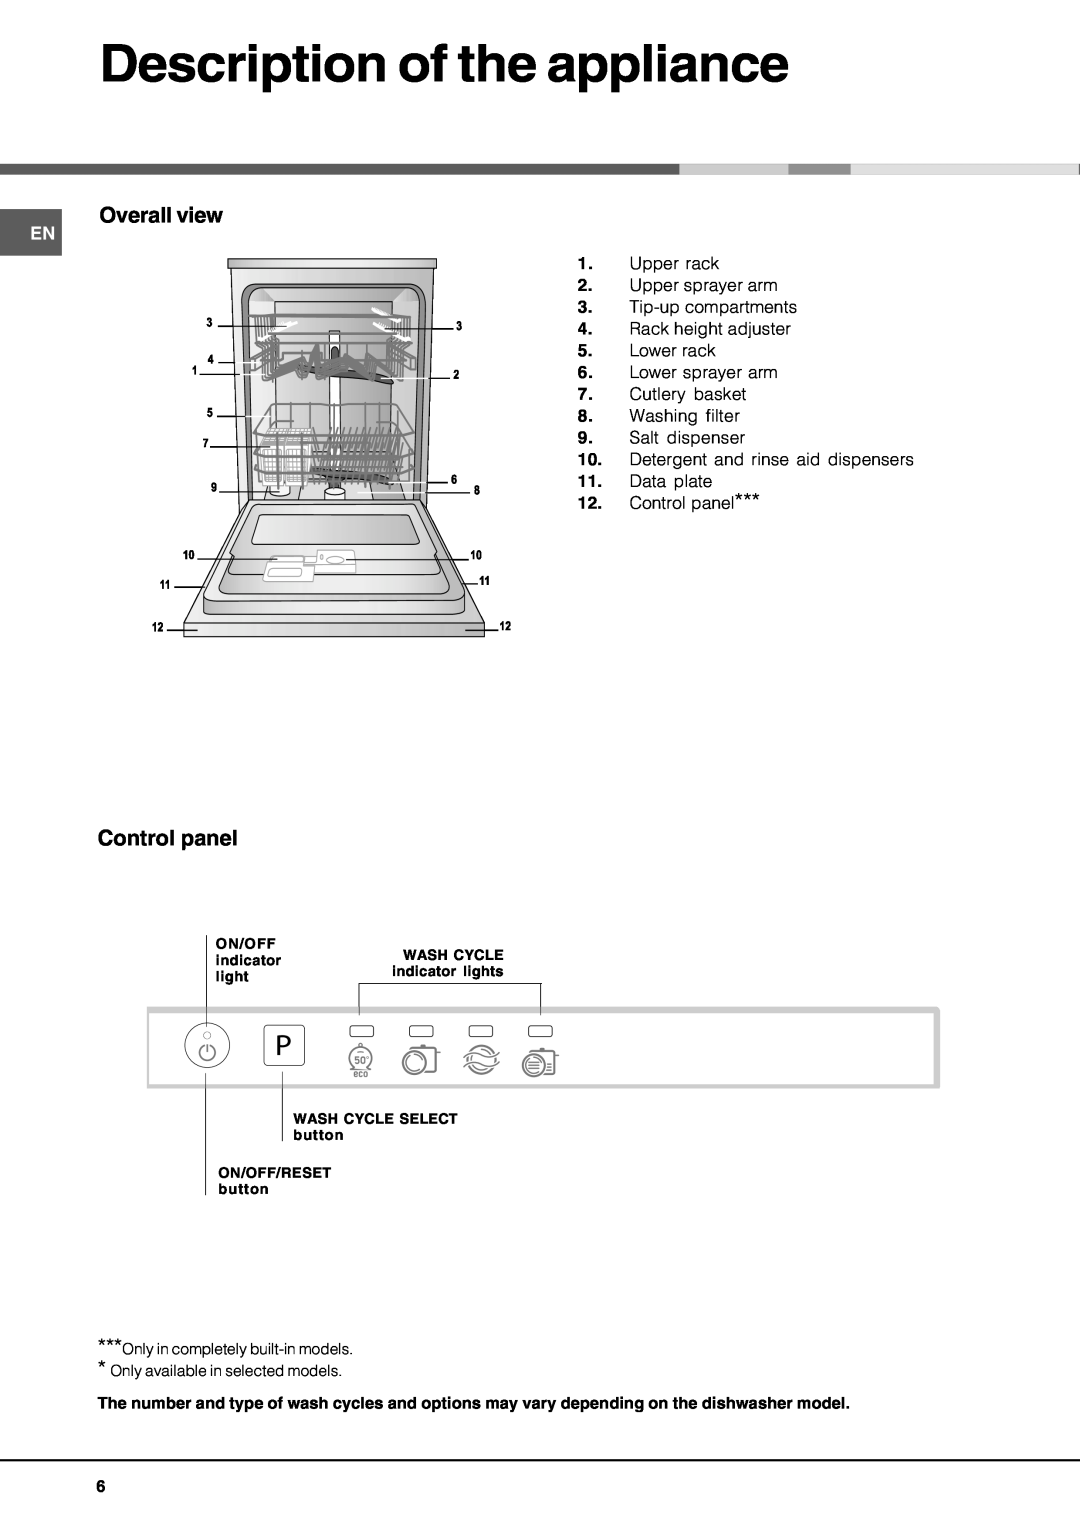 Hotpoint lft 04 manual Description of the appliance, Overall view, Control panel 